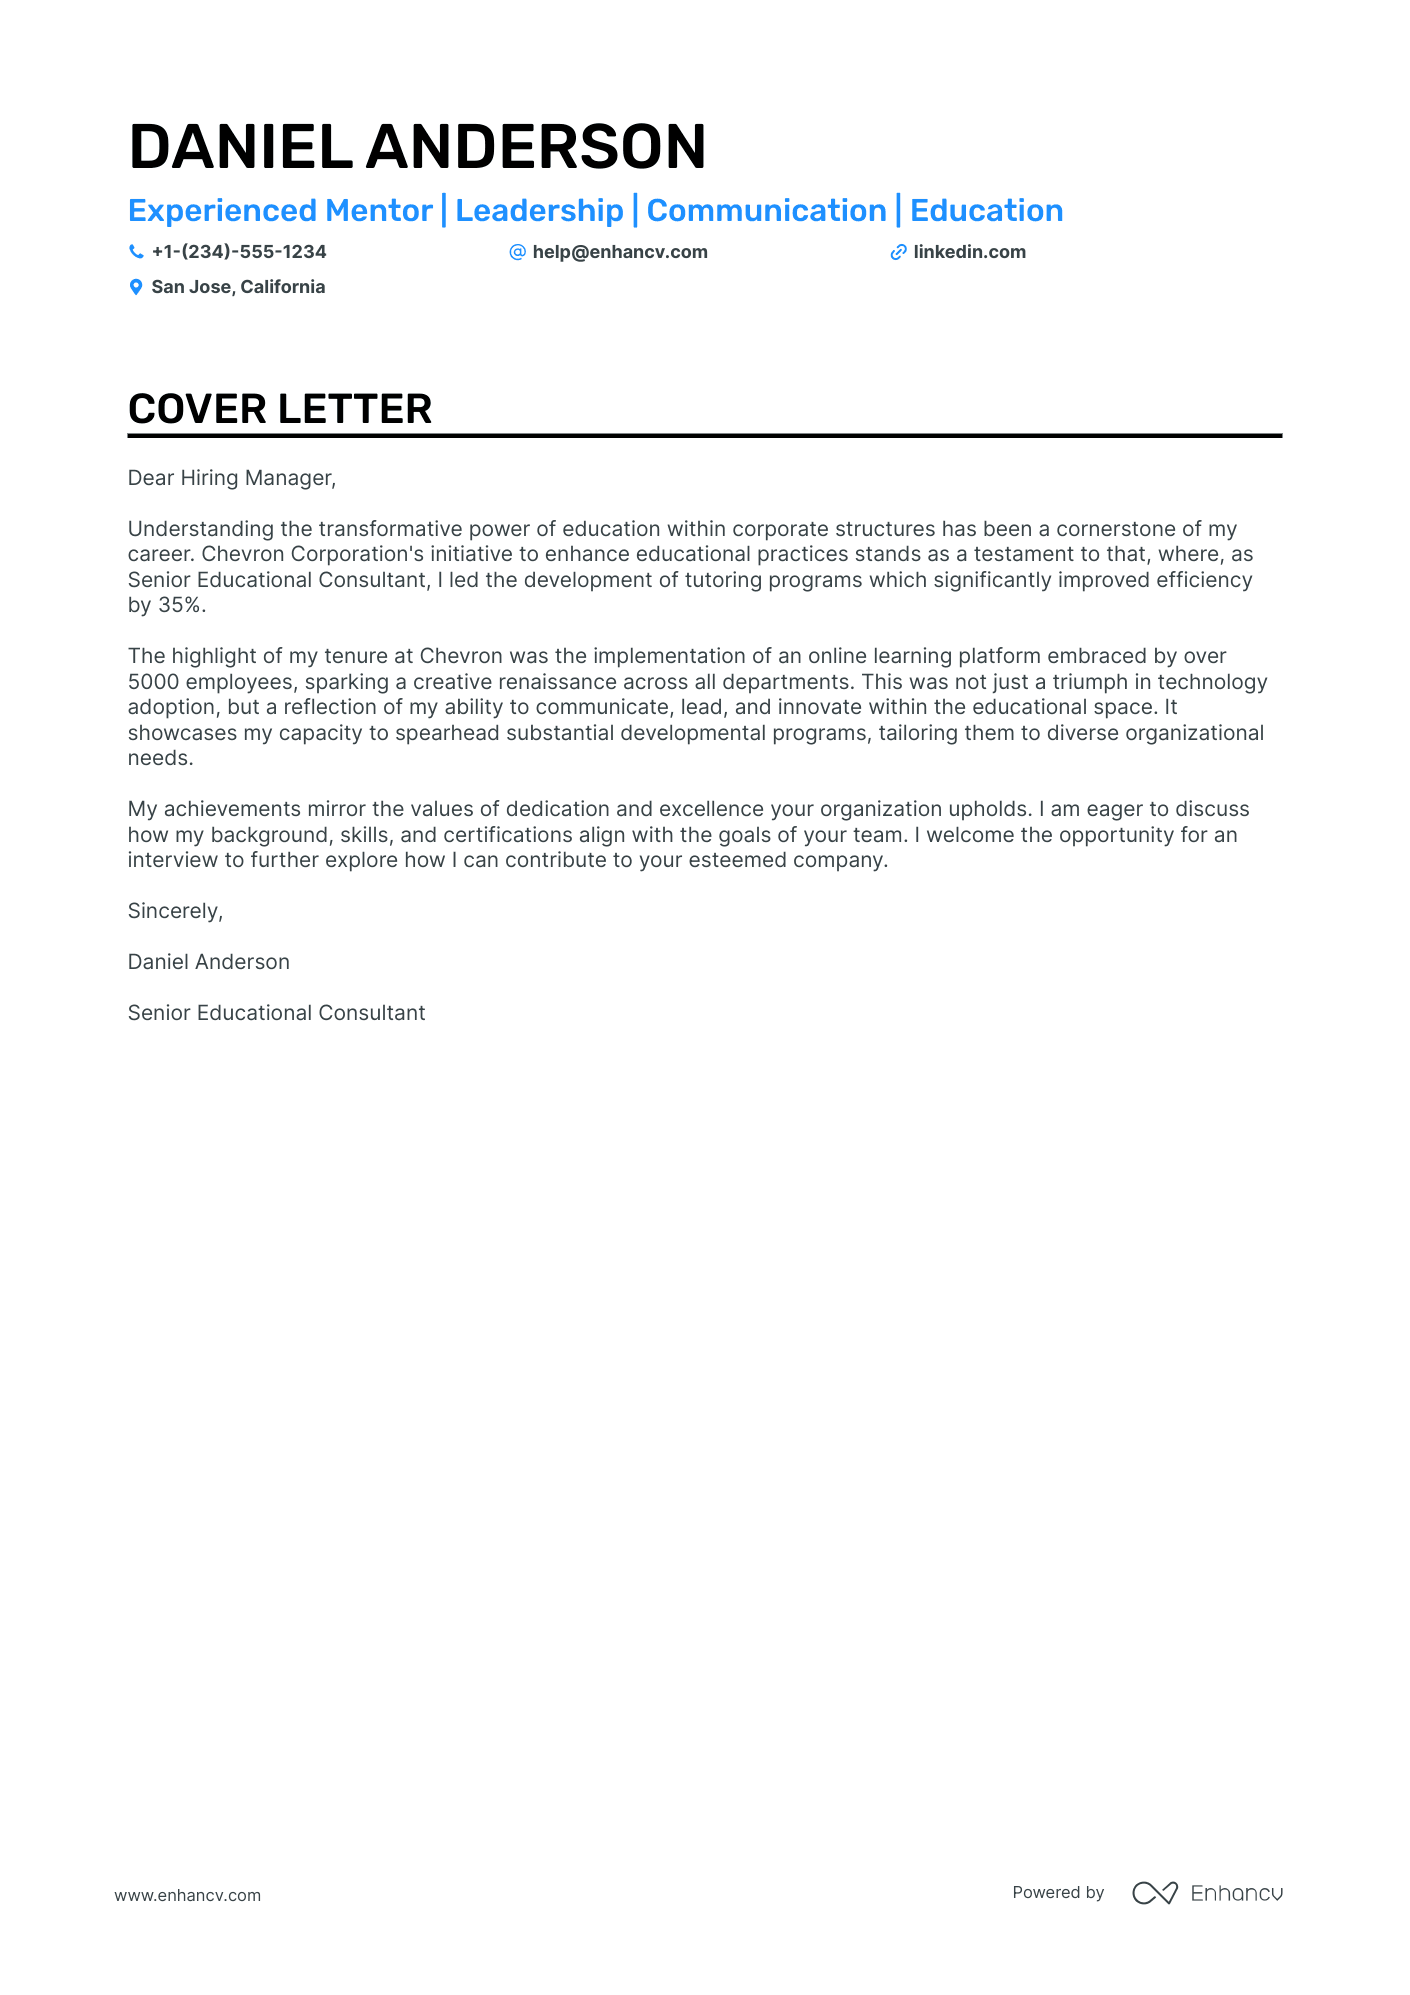 cover letter for youth mentor